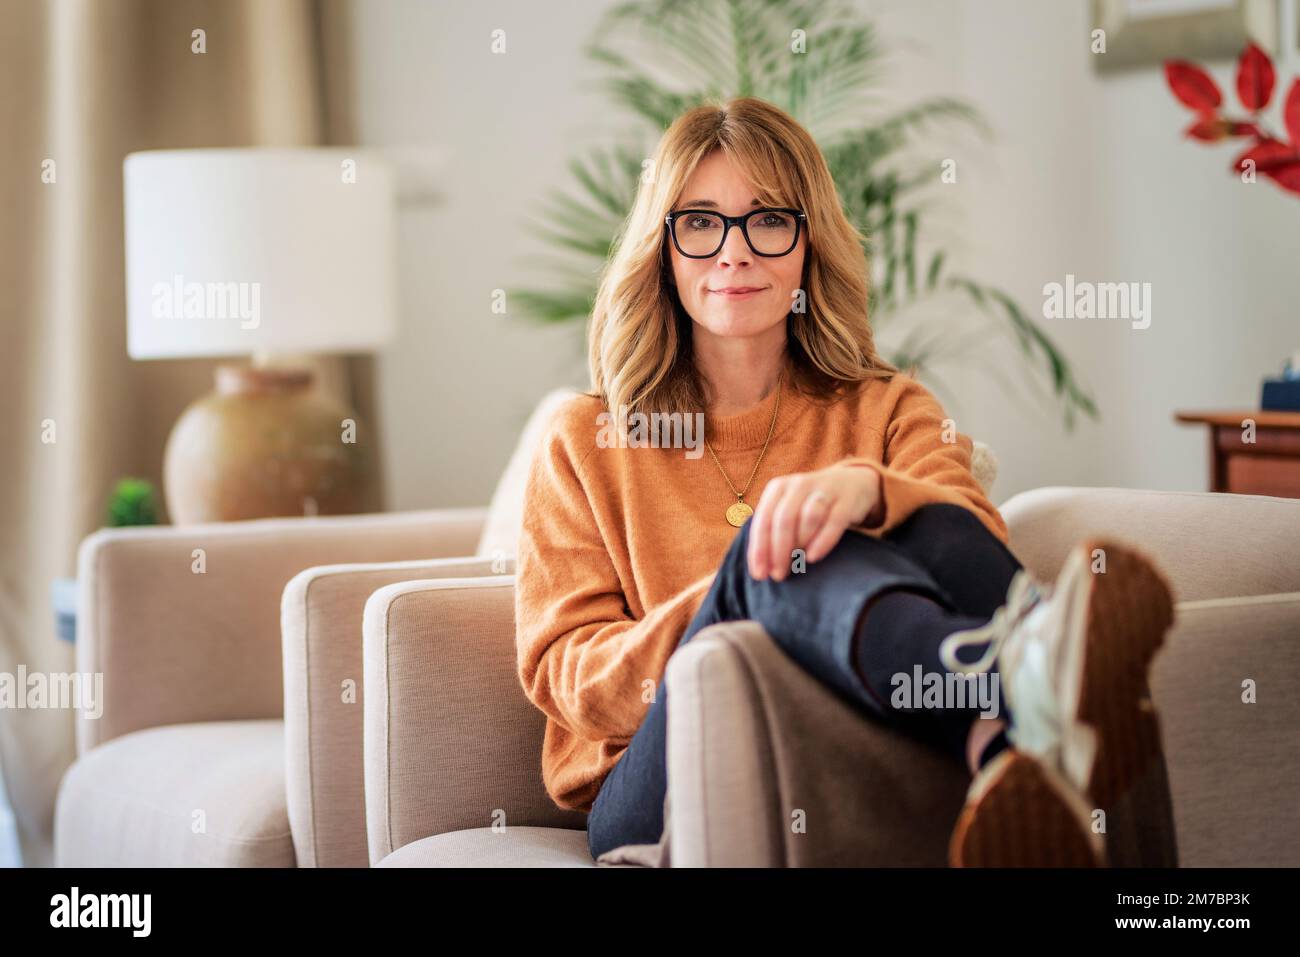 Portrait of attractive middle aged woman relaxing in an armchair at home. Blond haired female wearing eyeglasses and sweater. Stock Photo